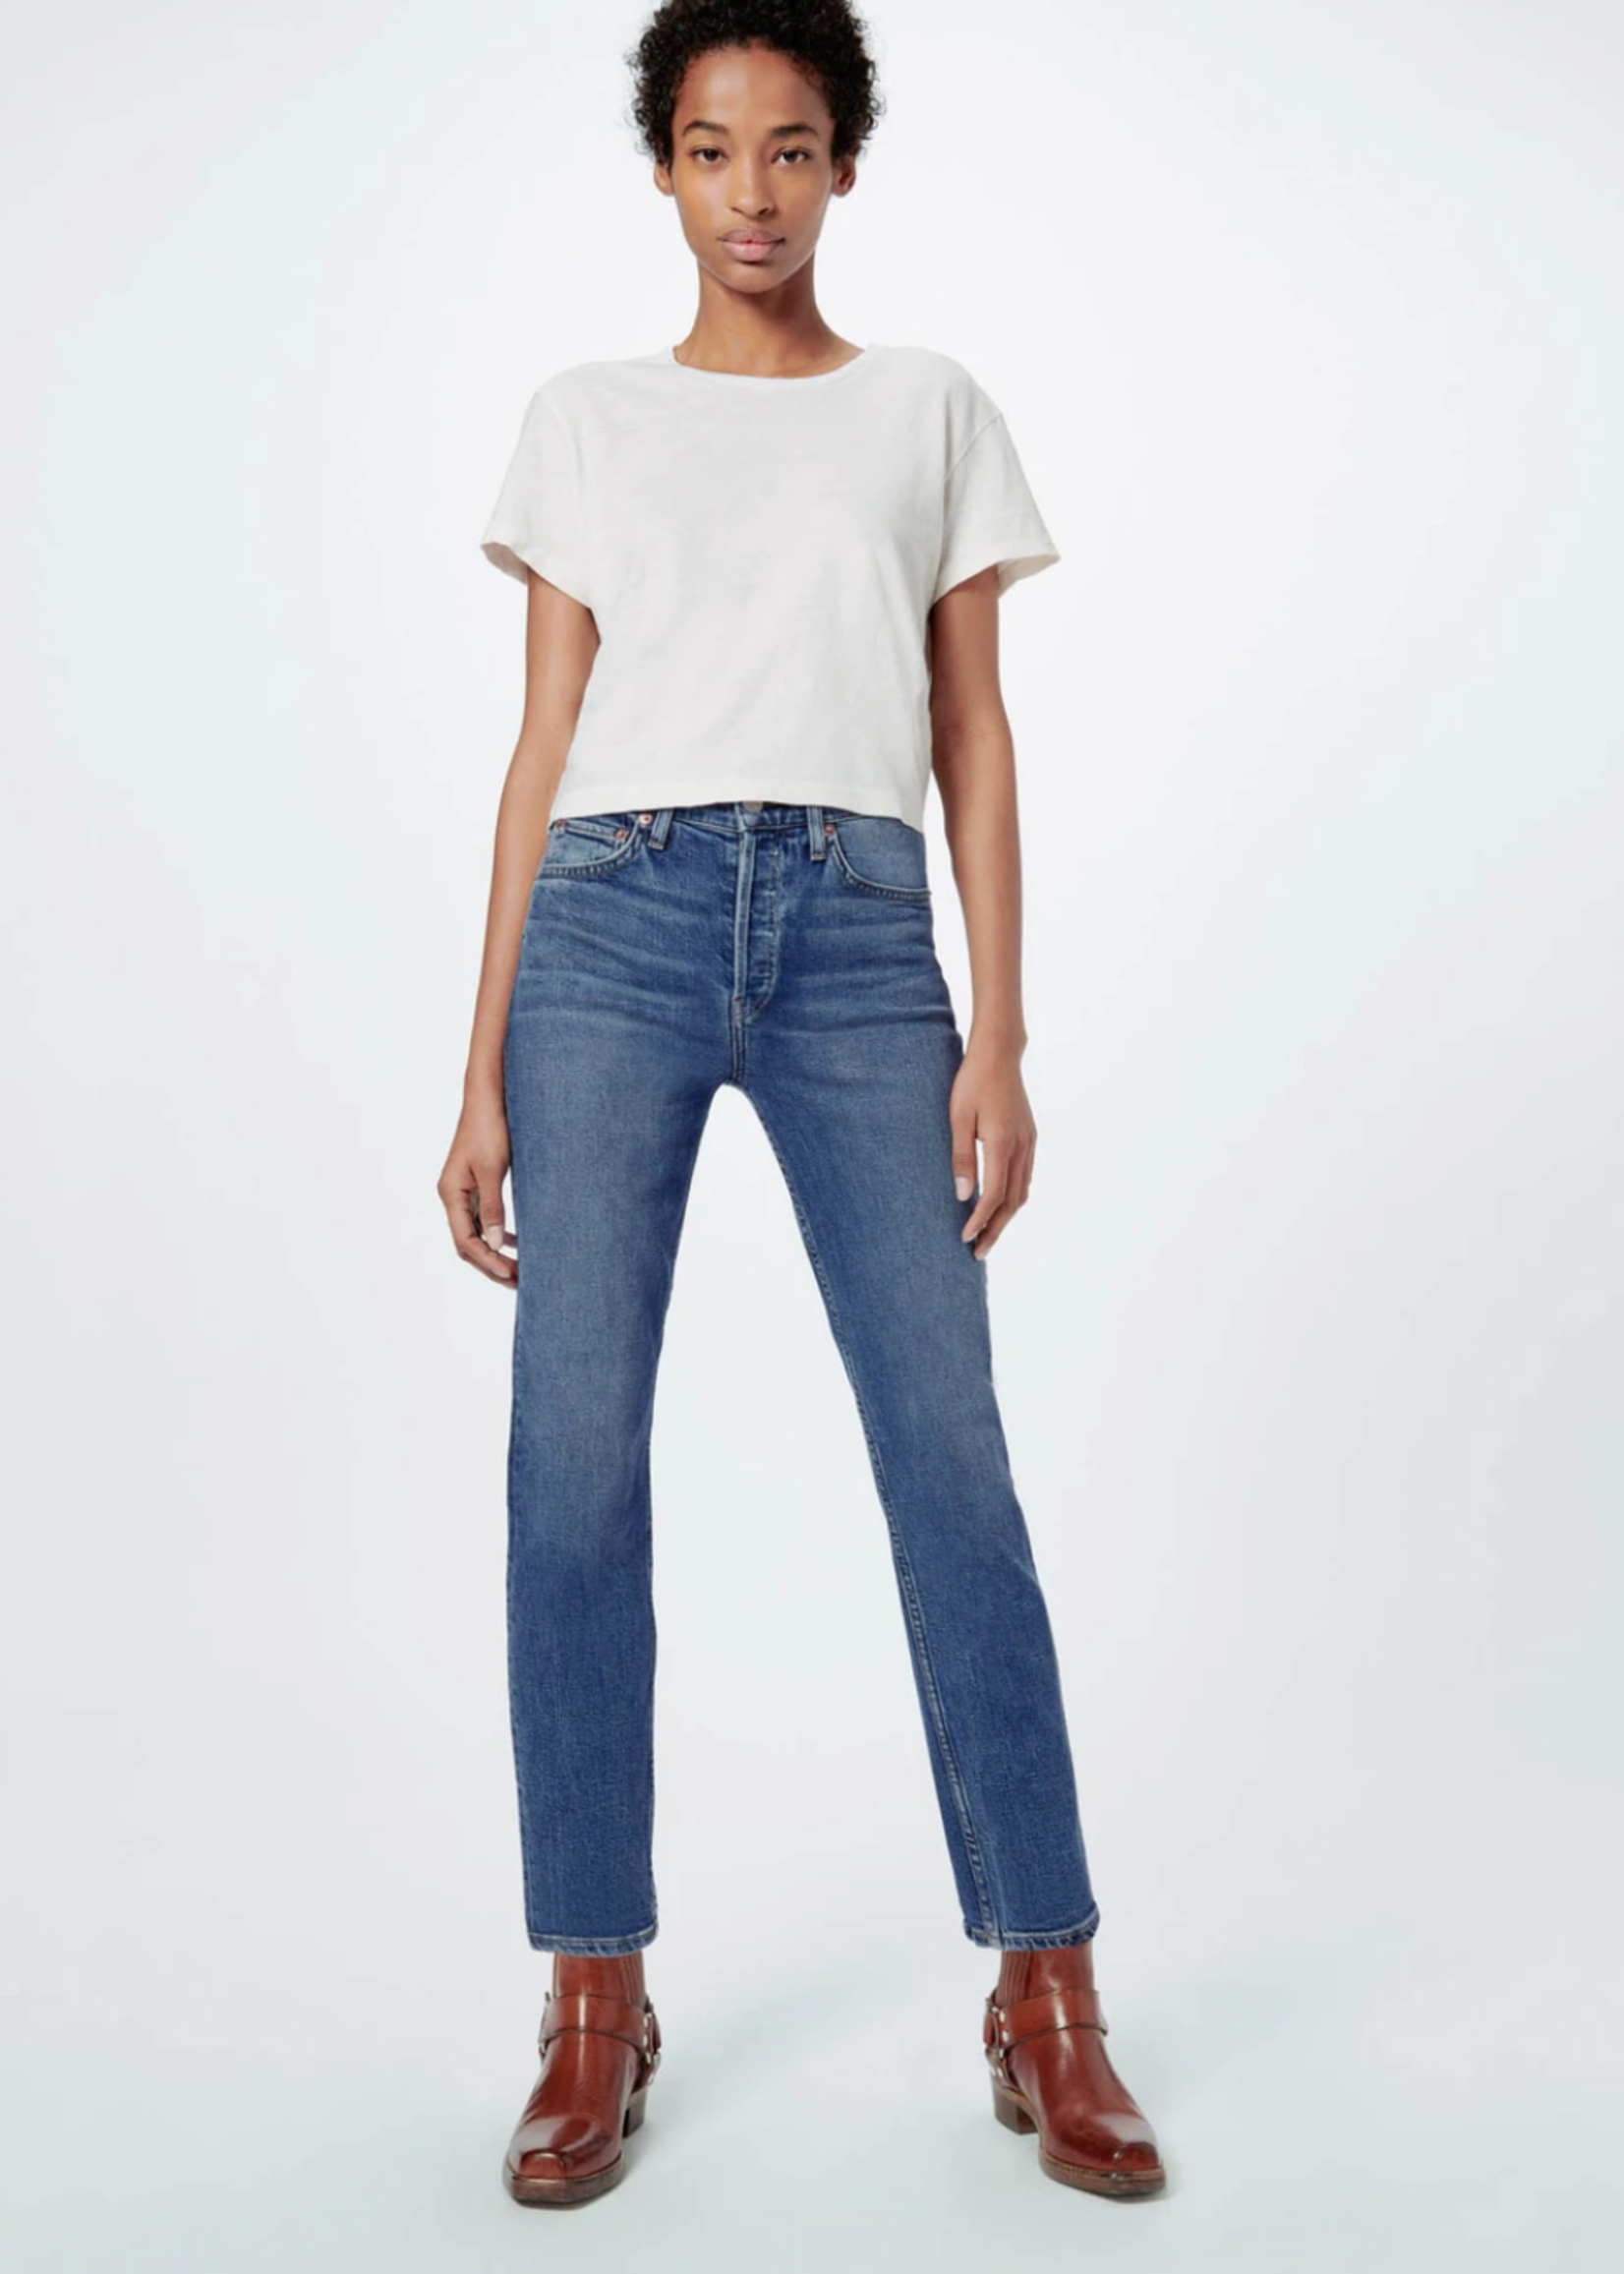 RE/DONE MID 70S 90'S HIGH RISE CROP JEAN 5/21